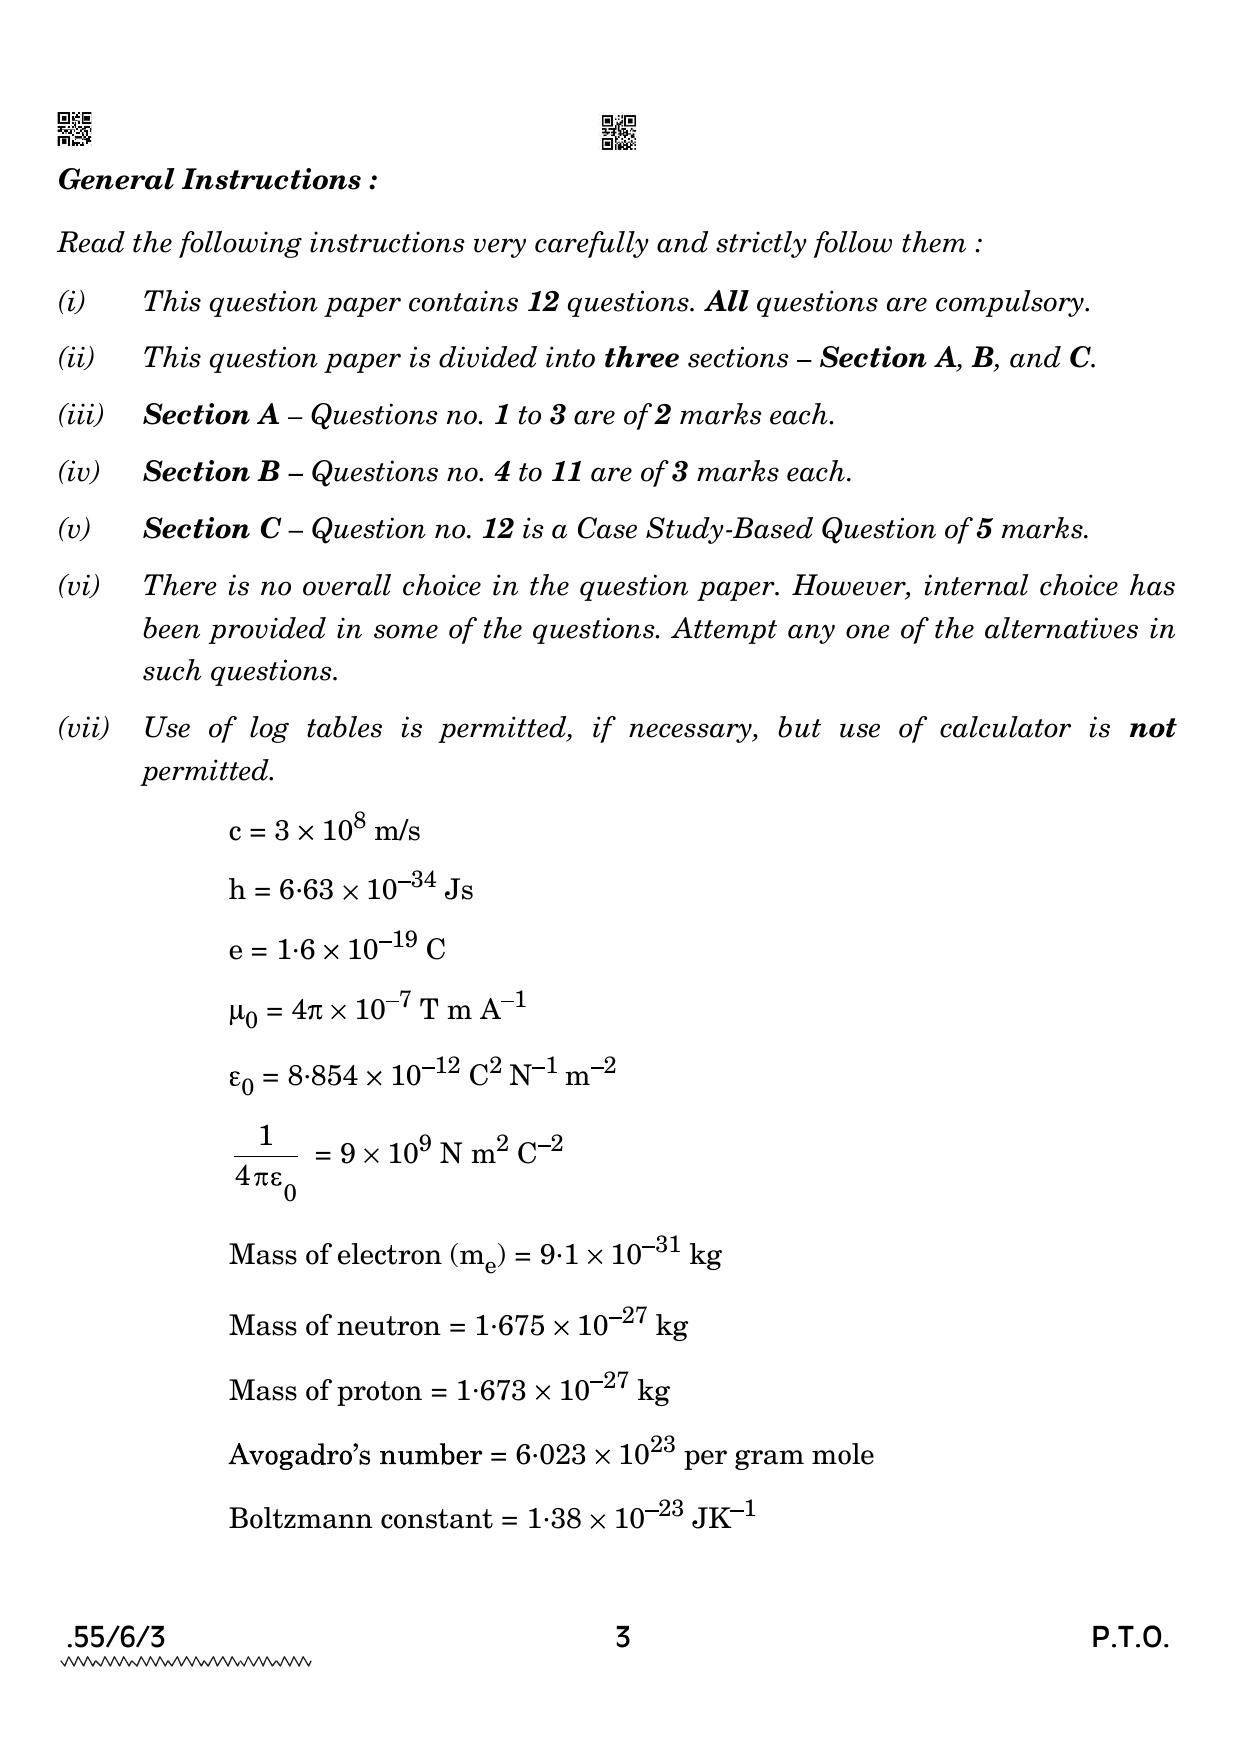 CBSE Class 12 55-6-3 PHYSICS 2022 Compartment Question Paper - Page 3